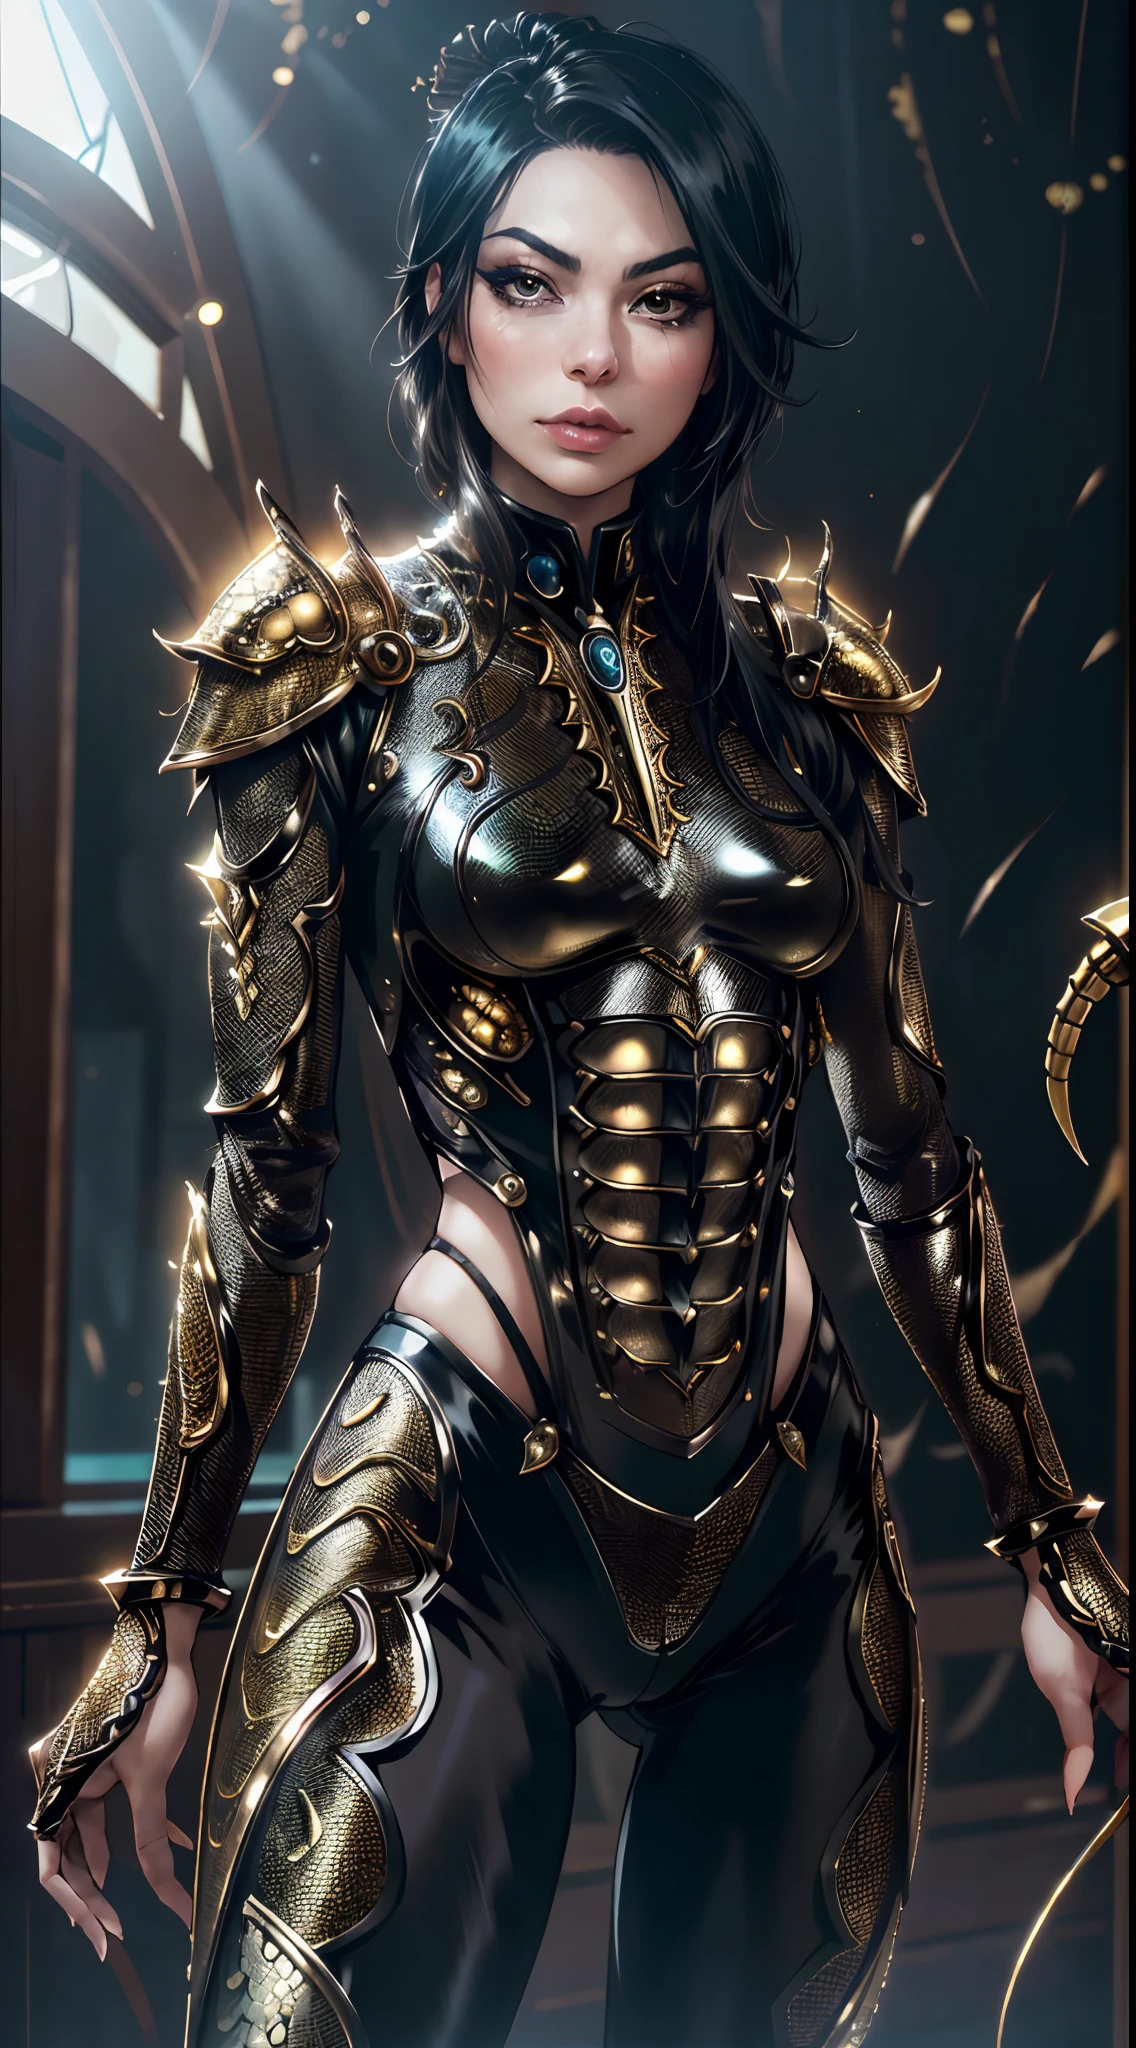 extremely detailed 8k wallpaper, intricate, richly detailed, dramatic, ((Miranda Cosgrove)), (((anthropomorphic scorpio woman))), wears bodysuit, ((scorpion tail behind back)), wields knives, assassin, makeup, fit, seductive, sexy, hot, sultry, shapely, ready for combat, sinister face, graphics insanely, light is reflected in the ornaments, whole person with some distance from the surroundings